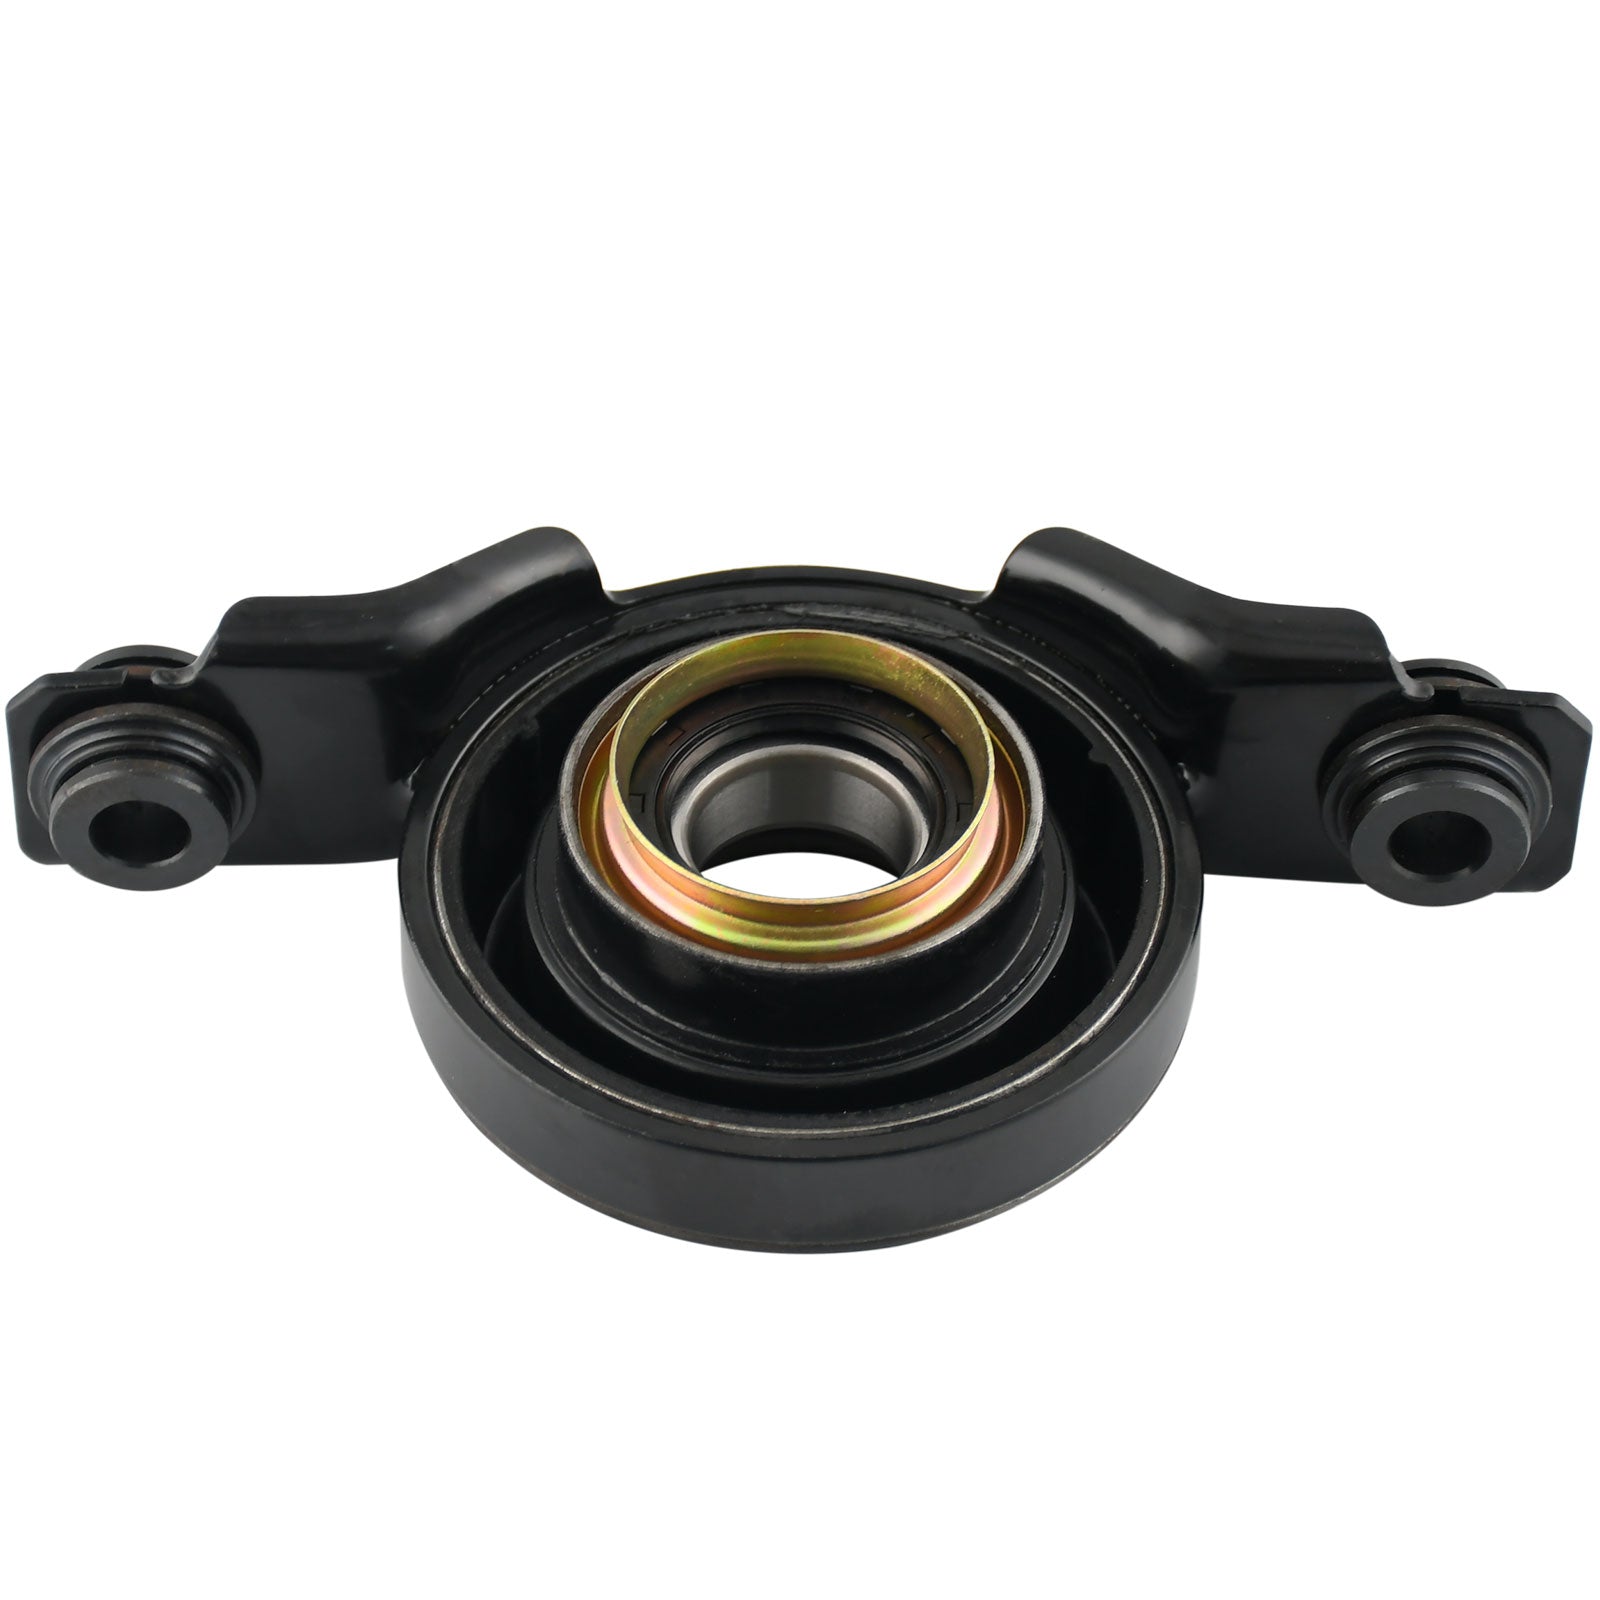 Driveshaft Center Support Bearing Fits for Ford F-250 F-350 F-450 F-550 F Super Duty, Ford F-250 F-350 F53 Center Support Assembly MotorbyMotor